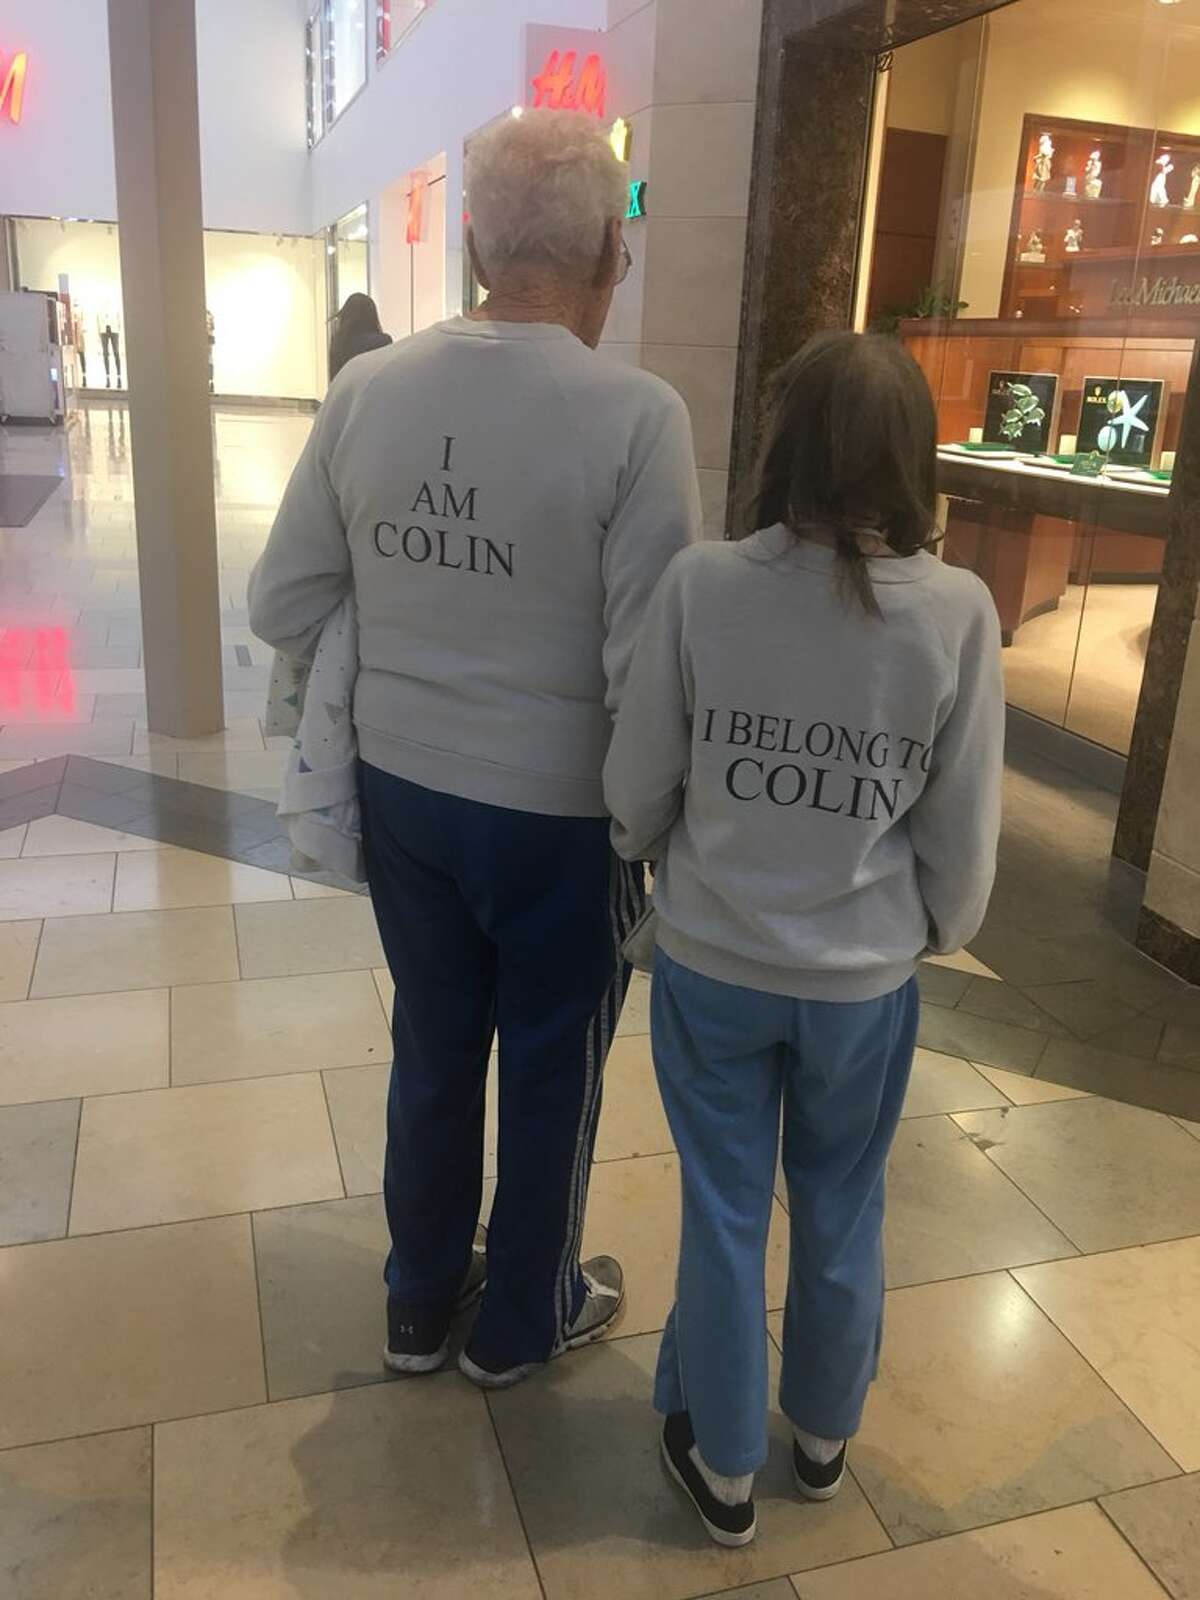 Hand-in-hand and often matching, Kittye and Colin were the power-walking power couple of North Star Mall who marched past storefronts daily, onto social media timelines and into thousands of romantic hearts that are now broken after learning one half of the duo has died.